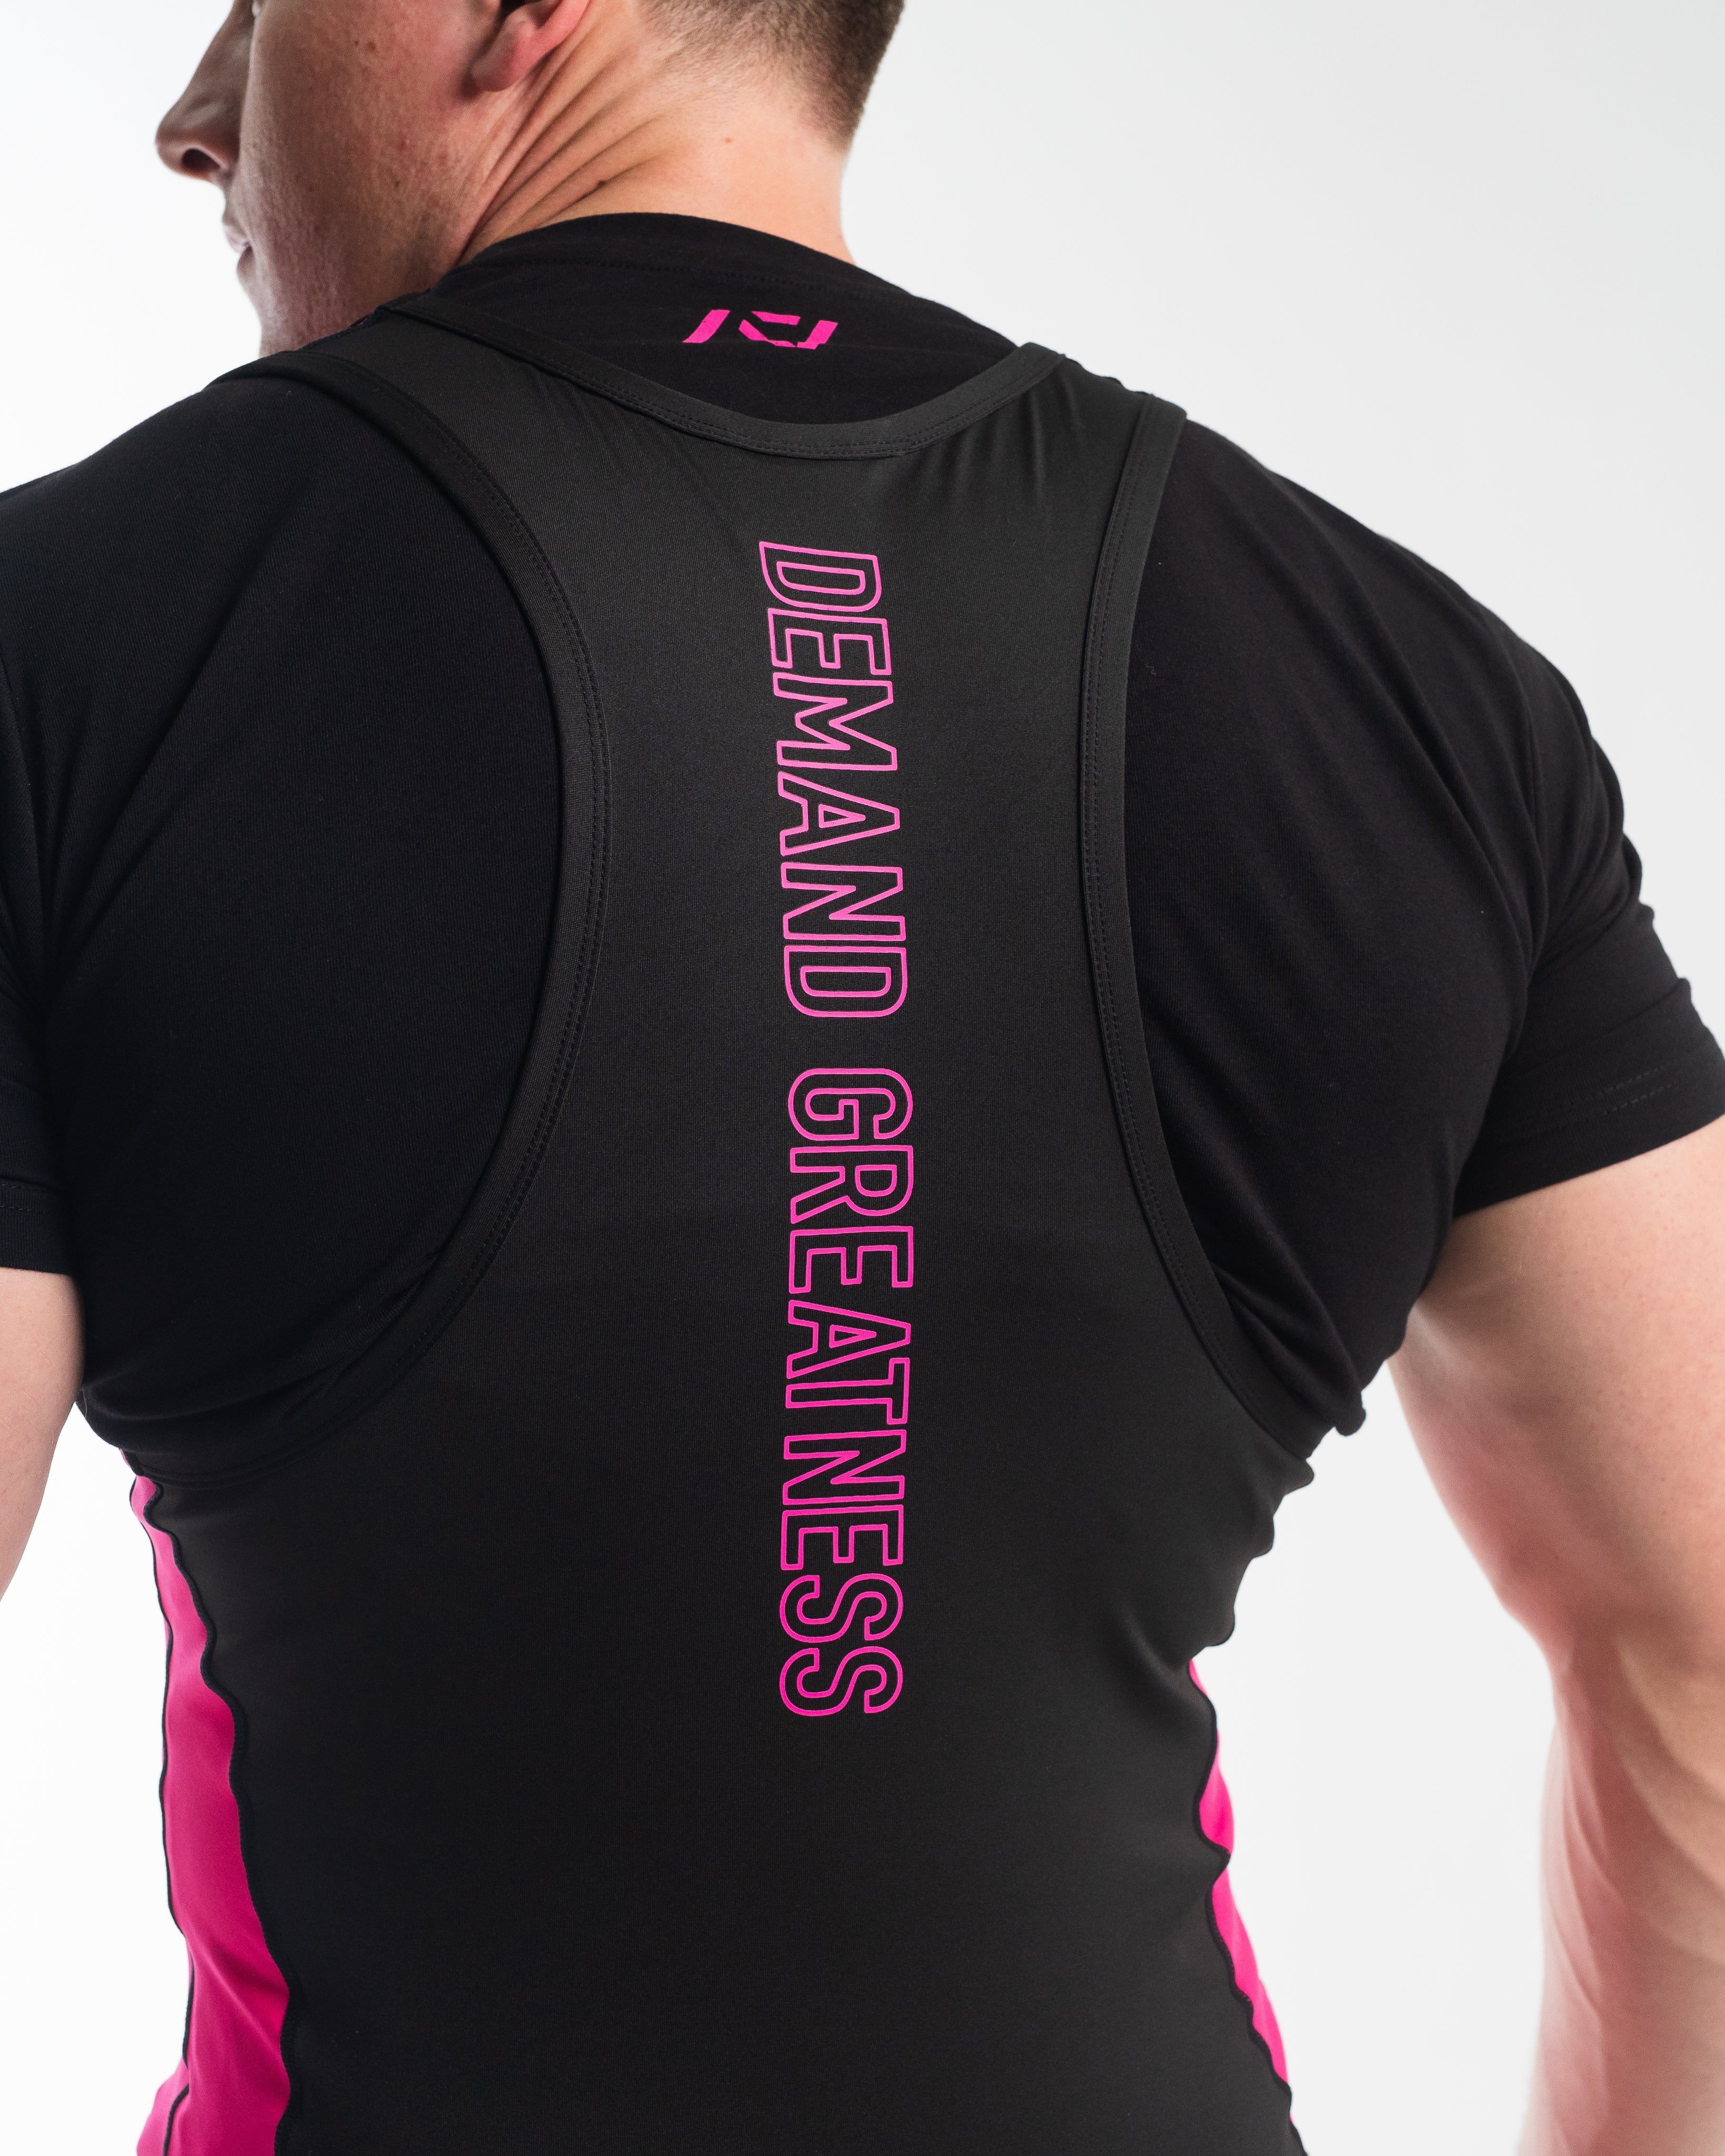 A7 IPF Approved Flamingo Luno singlet with extra lat mobility, side panel stitching to guide the squat depth level and curved panel design for a slimming look. The Women's cut singlet features a tapered waist and additional quad room. The IPF Approved Kit includes Powerlifting Singlet, A7 Meet Shirt, A7 Zebra Wrist Wraps, A7 Deadlift Socks, Hourglass Knee Sleeves (Stiff Knee Sleeves and Rigor Mortis Knee Sleeves). Genouillères powerlifting shipping to France, Spain, Ireland, Germany, Italy, Sweden and EU. 